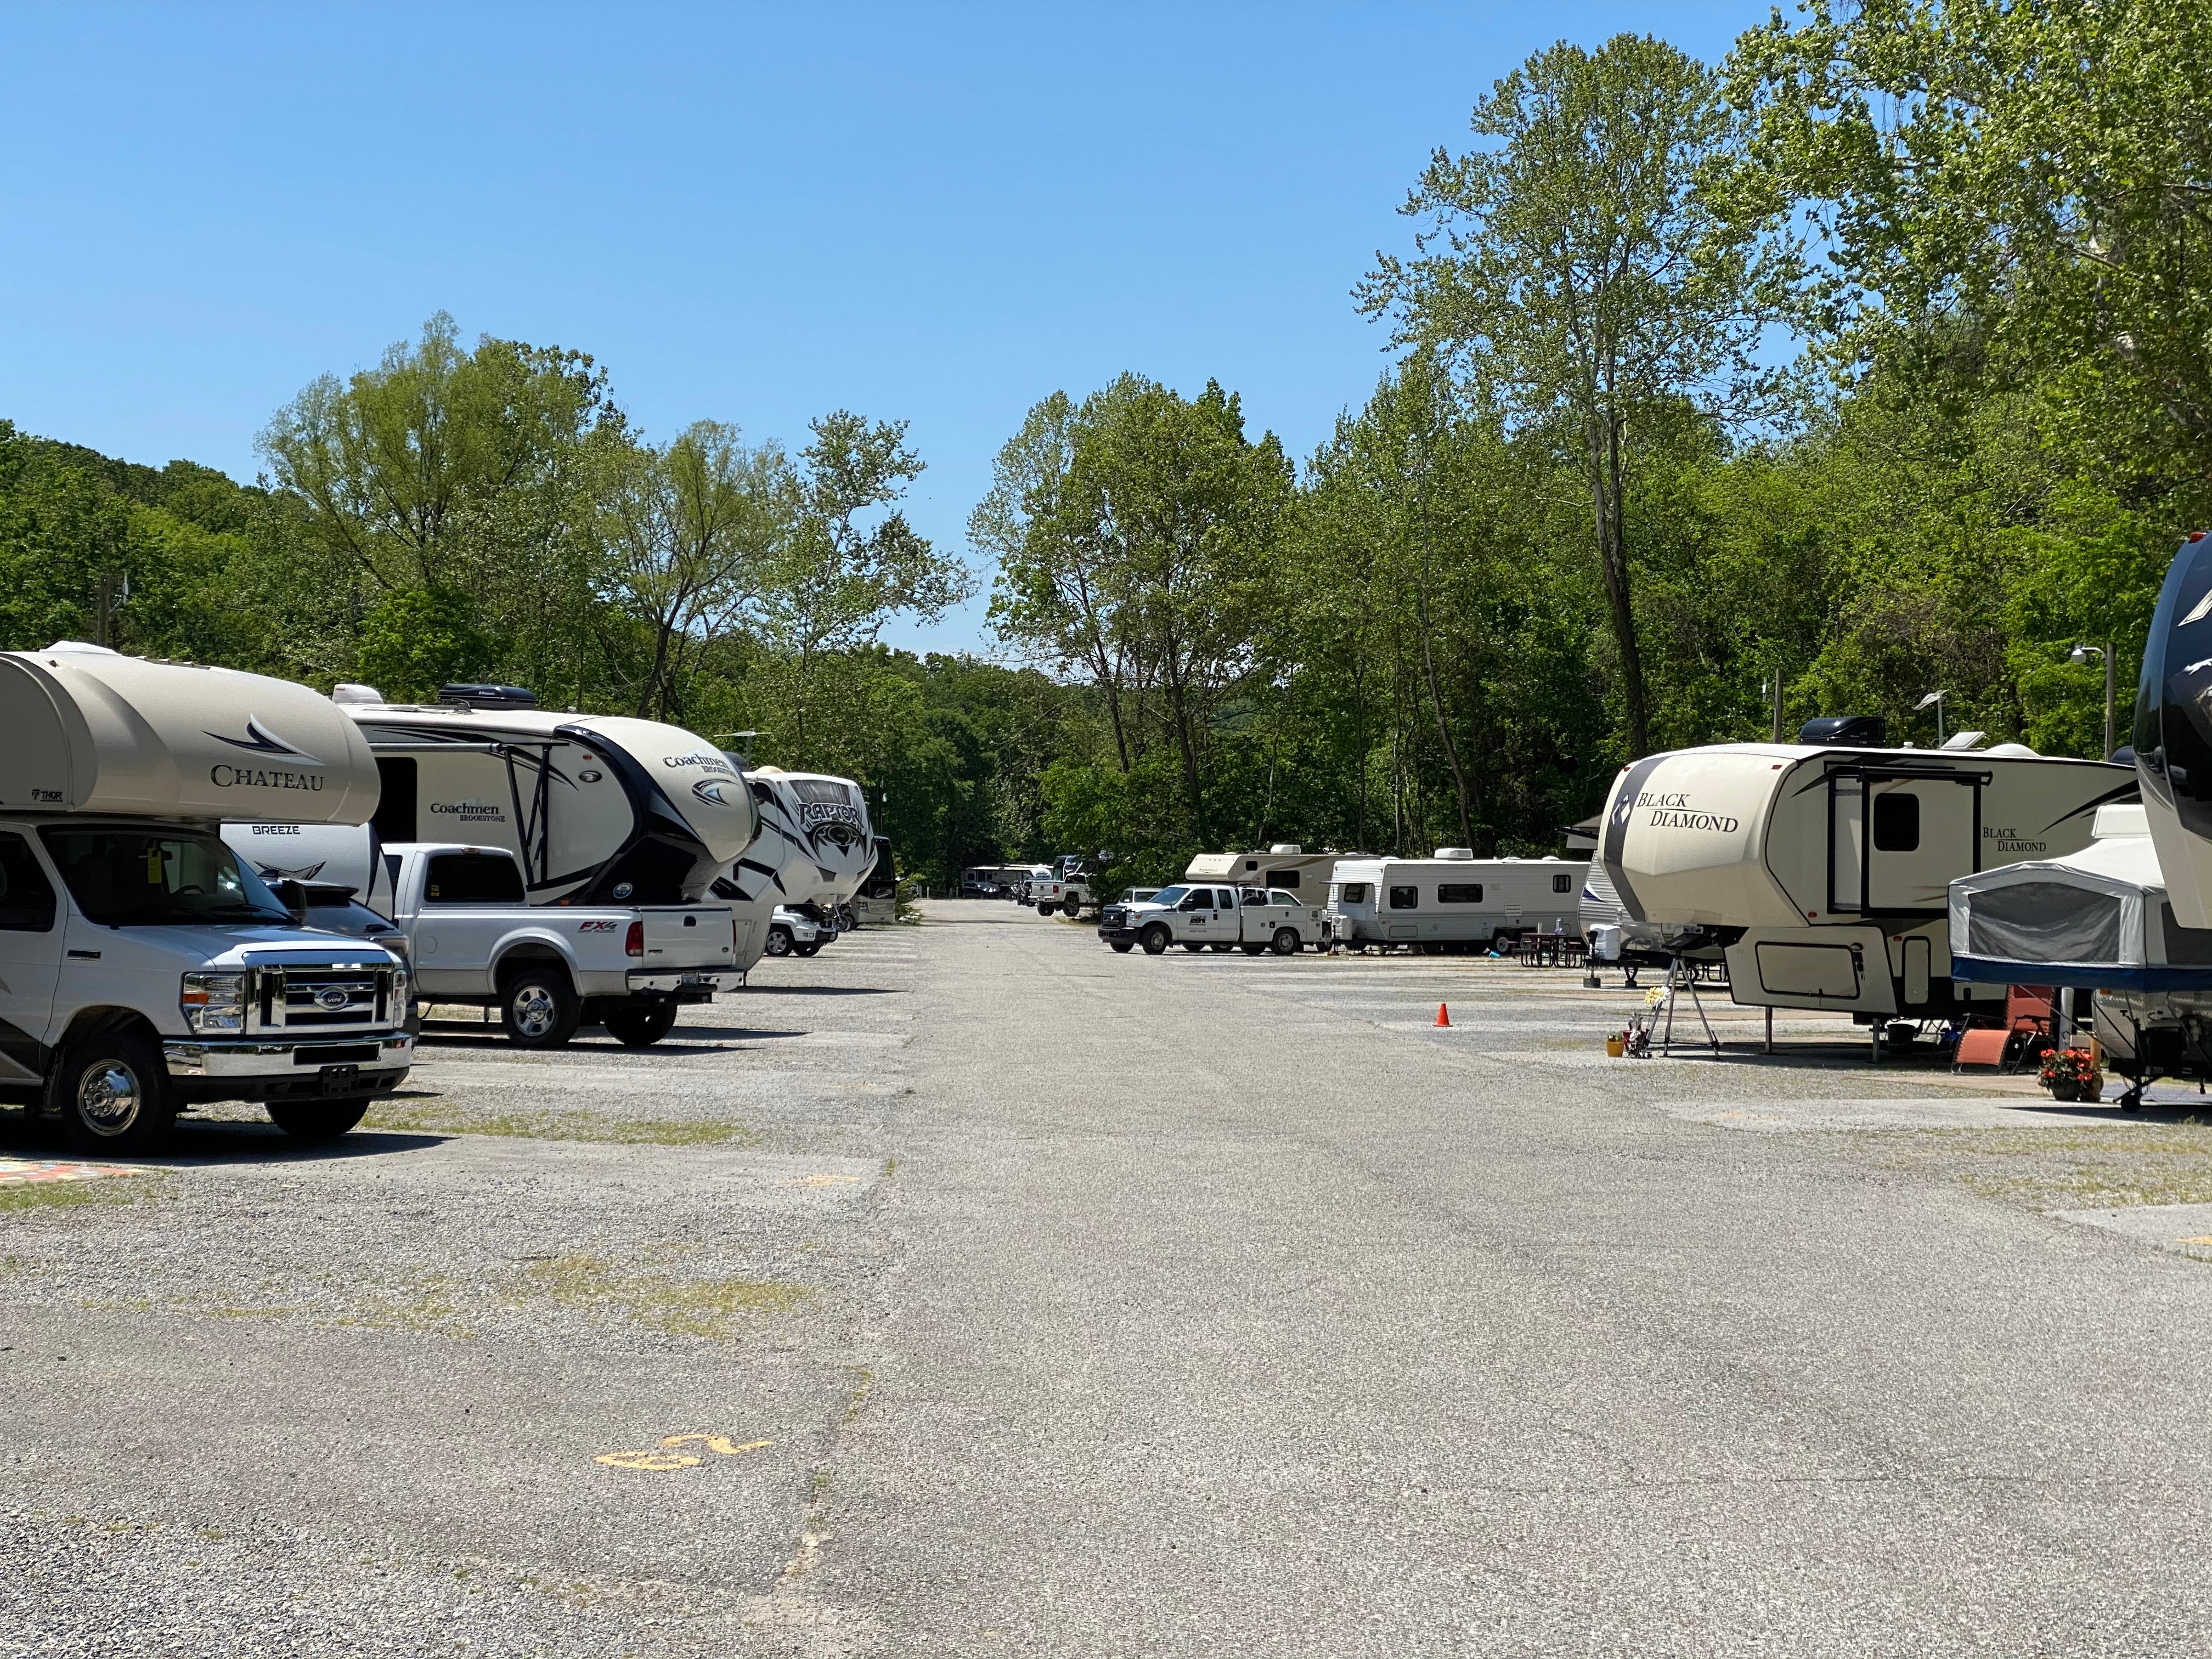 The RV lot/campground